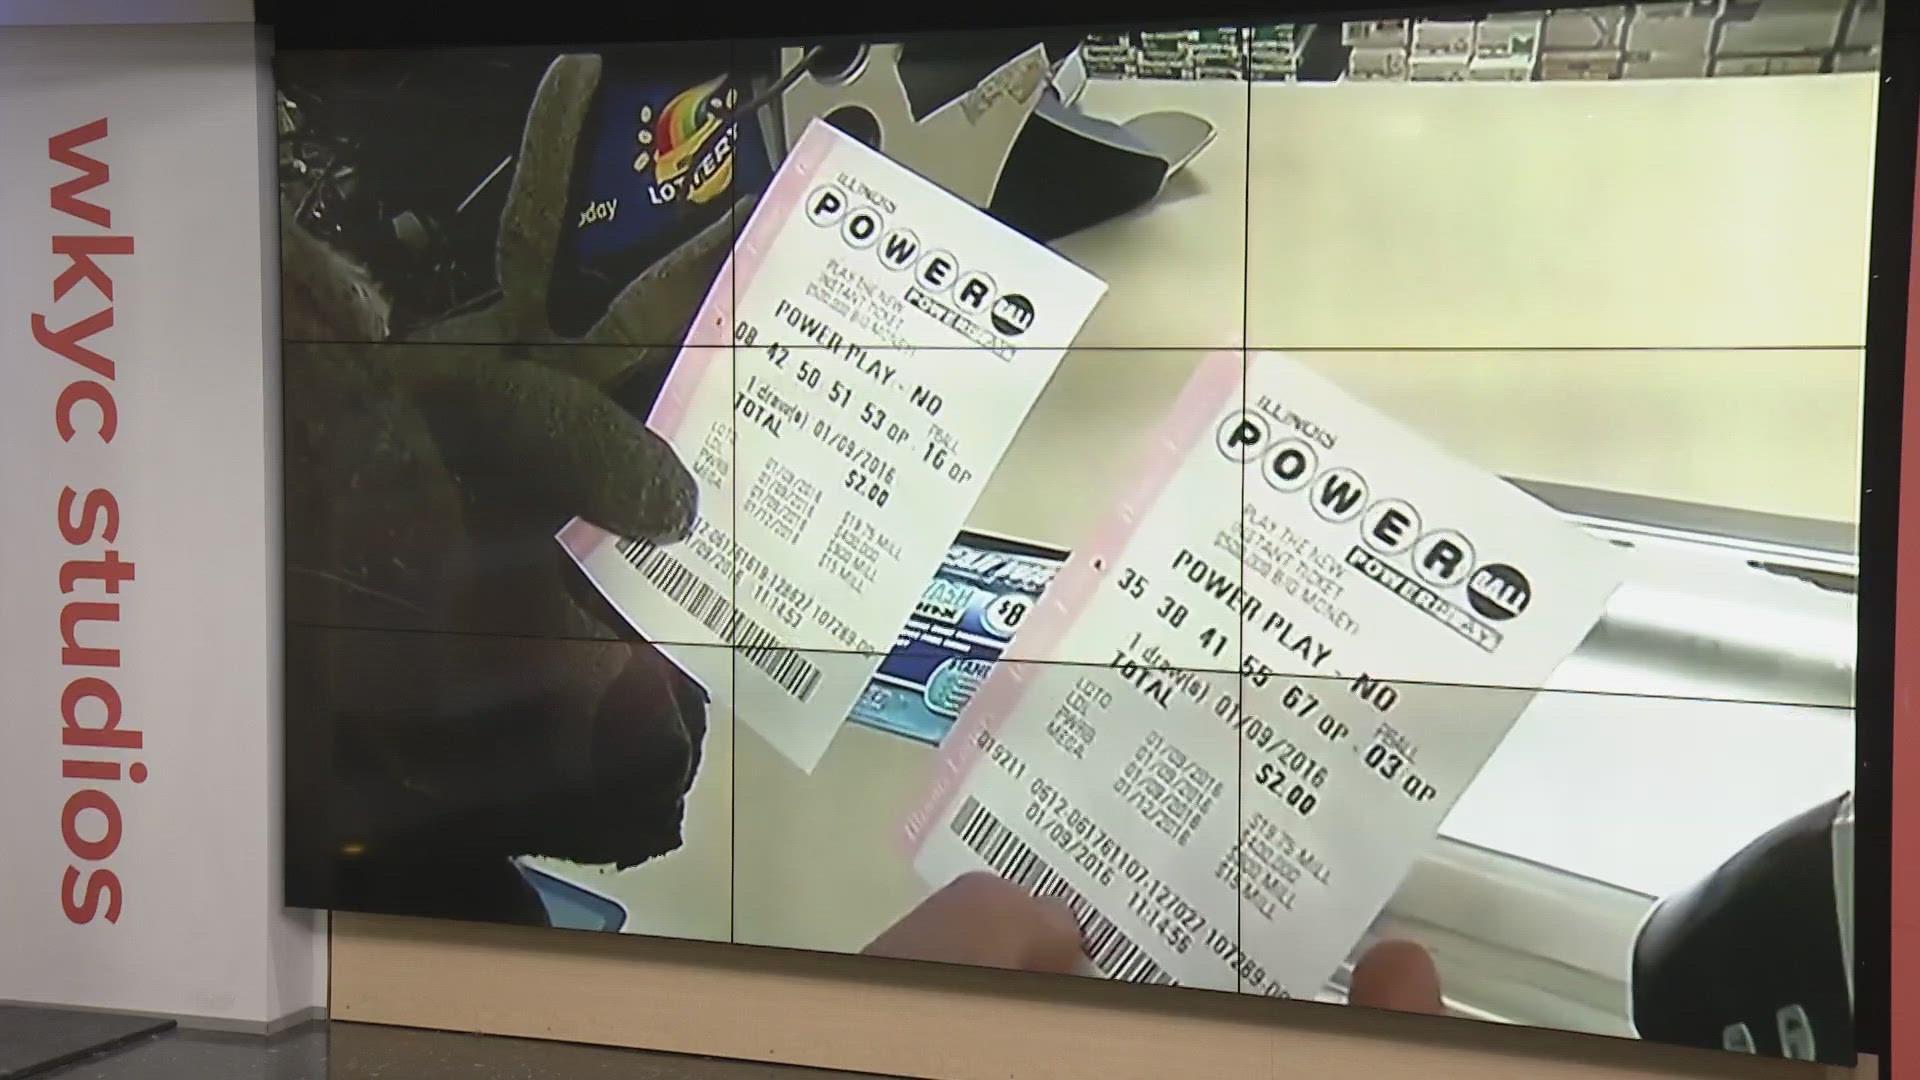 Powerball jackpot soars to $1 billion after no winning ticket is sold